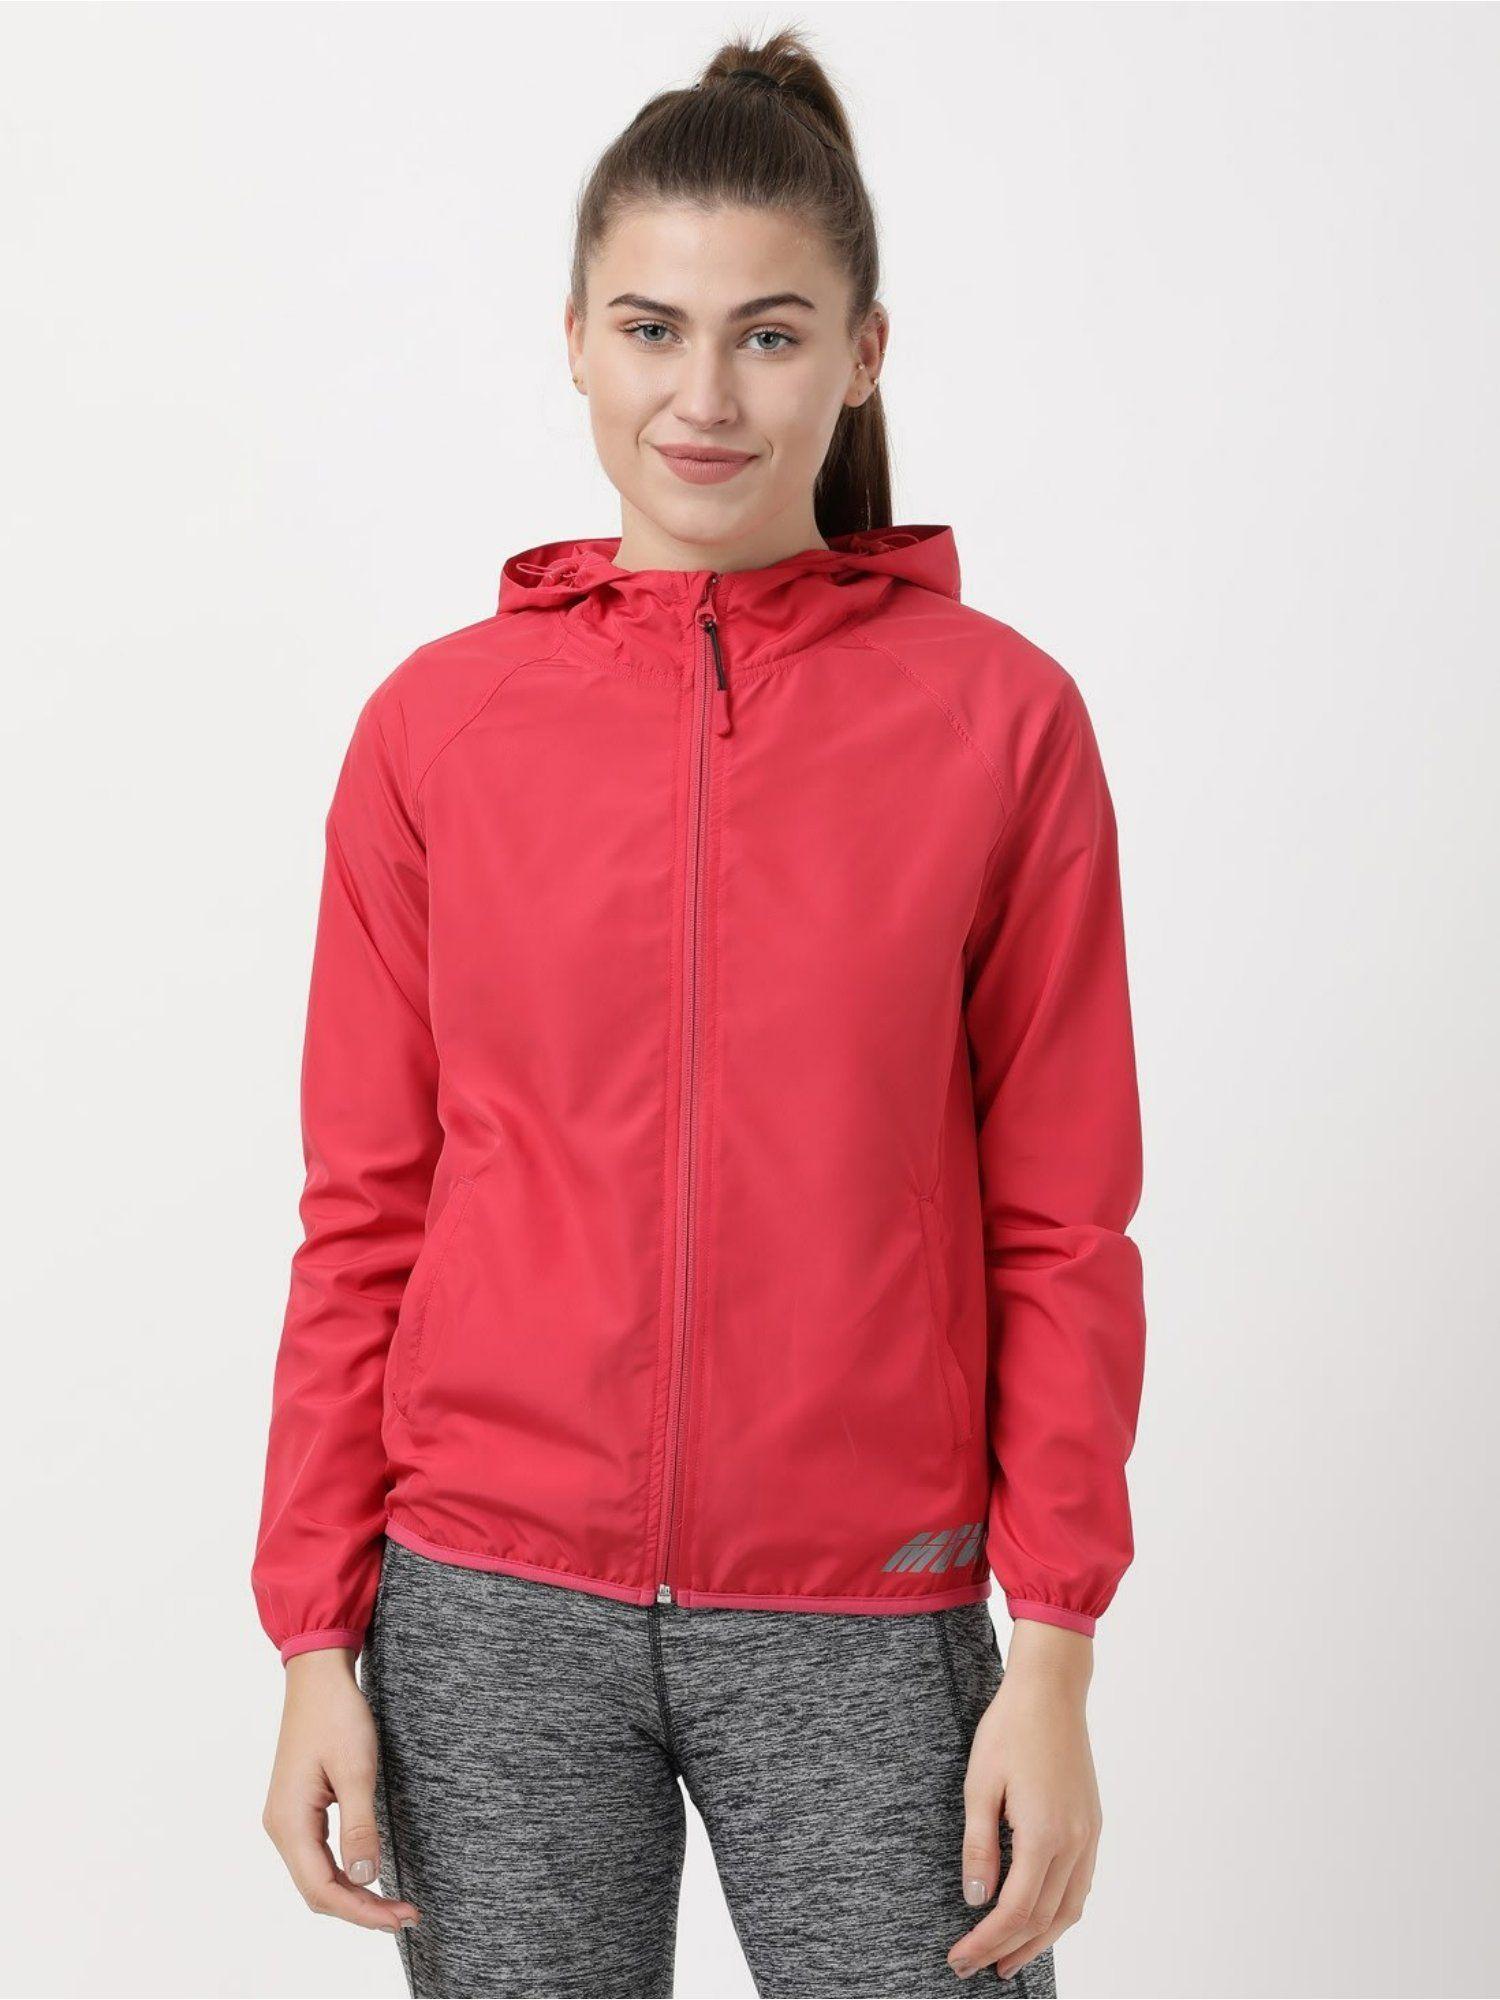 mw50-women's-microfiber-light-weight-jacket-with-stay-dry-treatment---pink